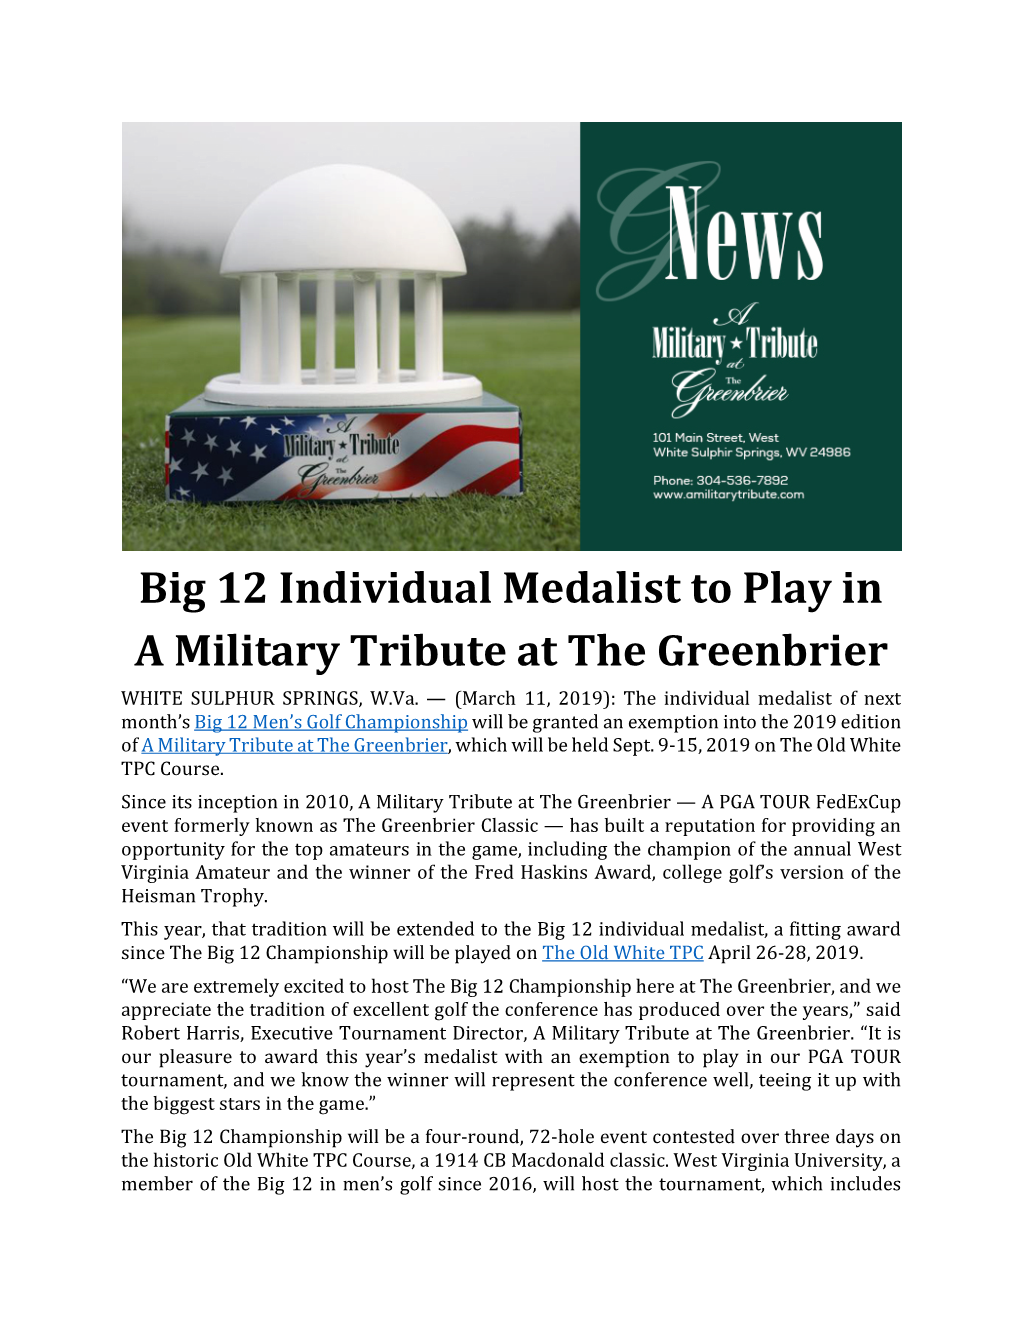 Big 12 Individual Medalist to Play in a Military Tribute at the Greenbrier WHITE SULPHUR SPRINGS, W.Va